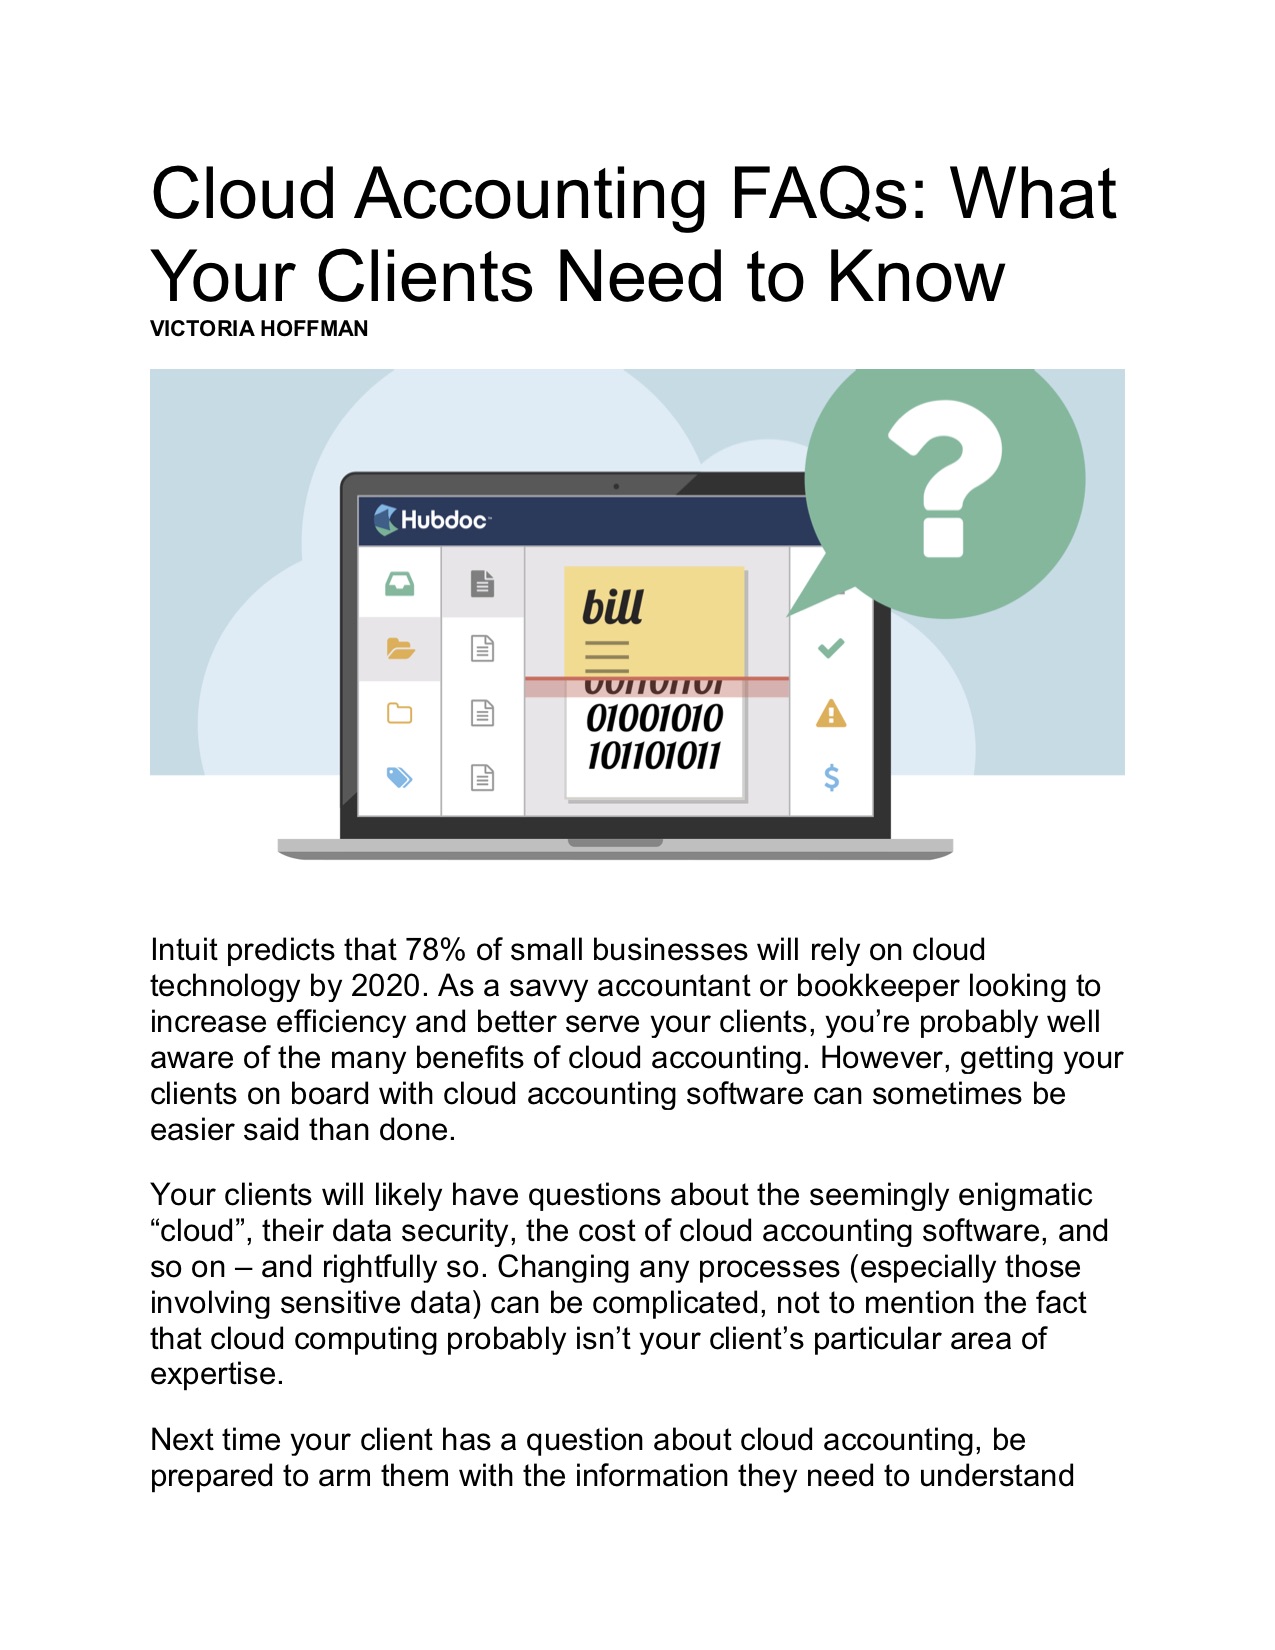 Cloud Accounting FAQs - What Your Clients Need to Know